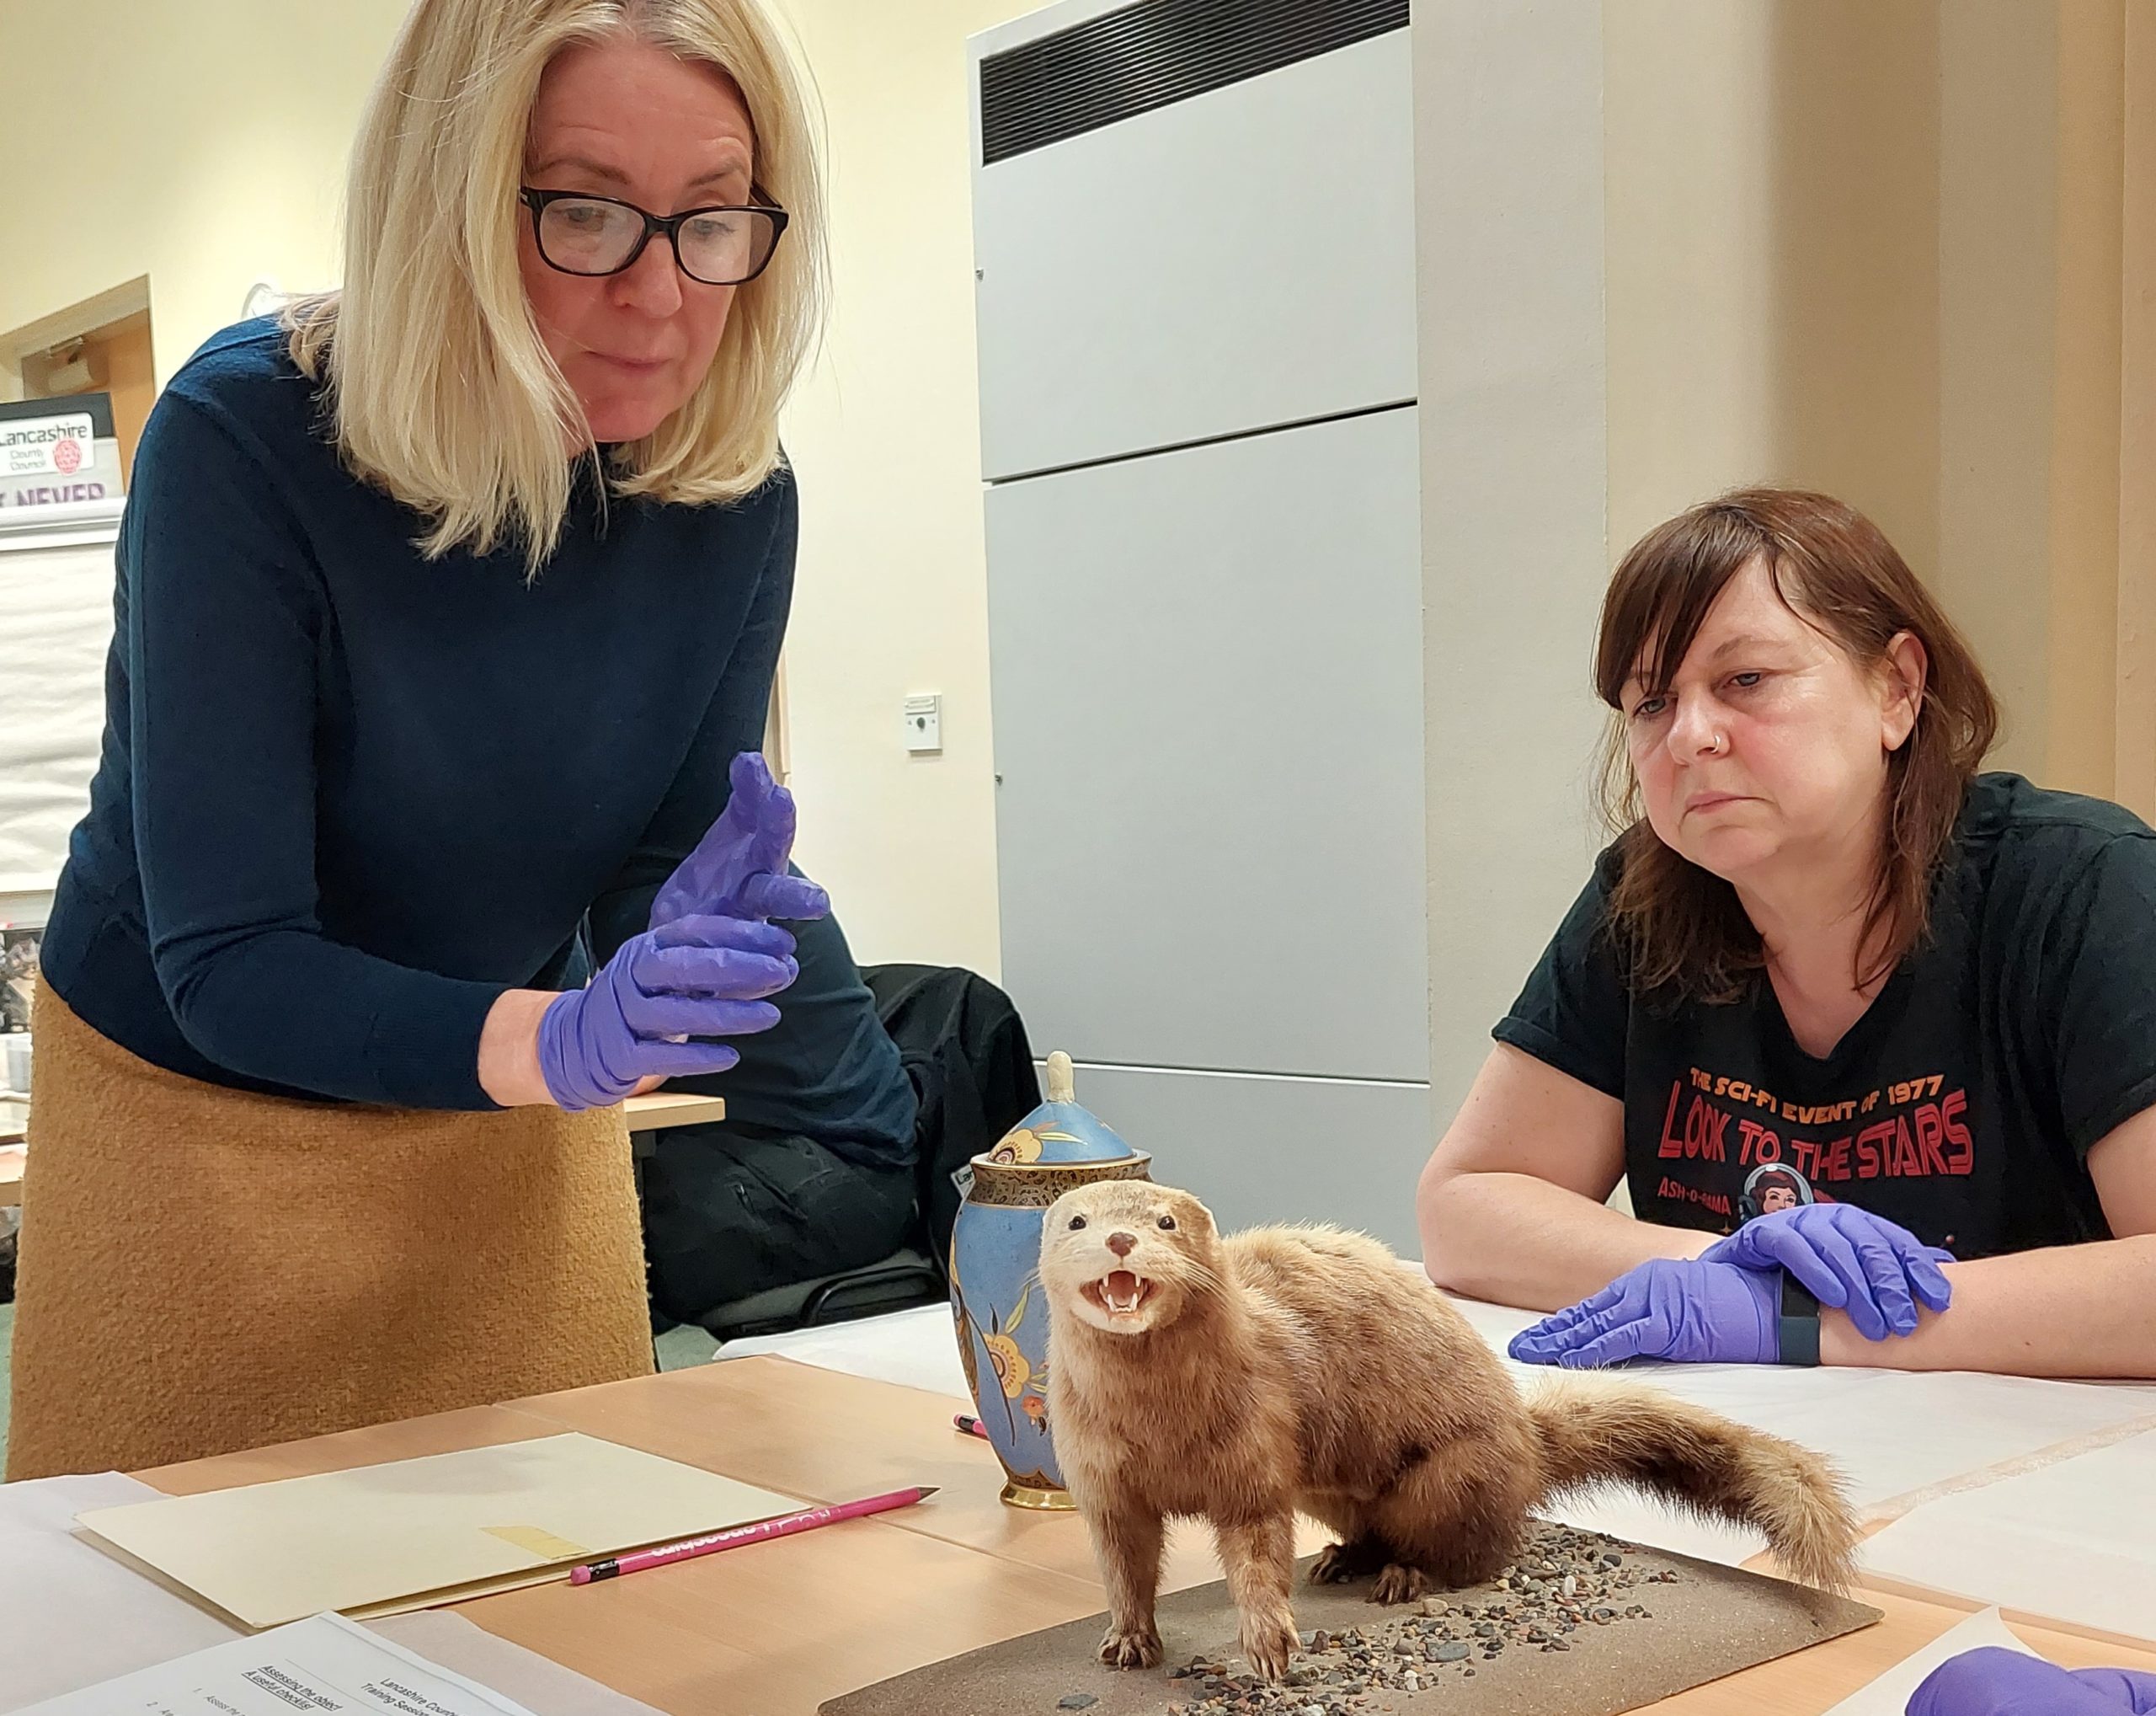 Two women wearing purple gloves inspect a stuffed stoat which is standing up on a table.